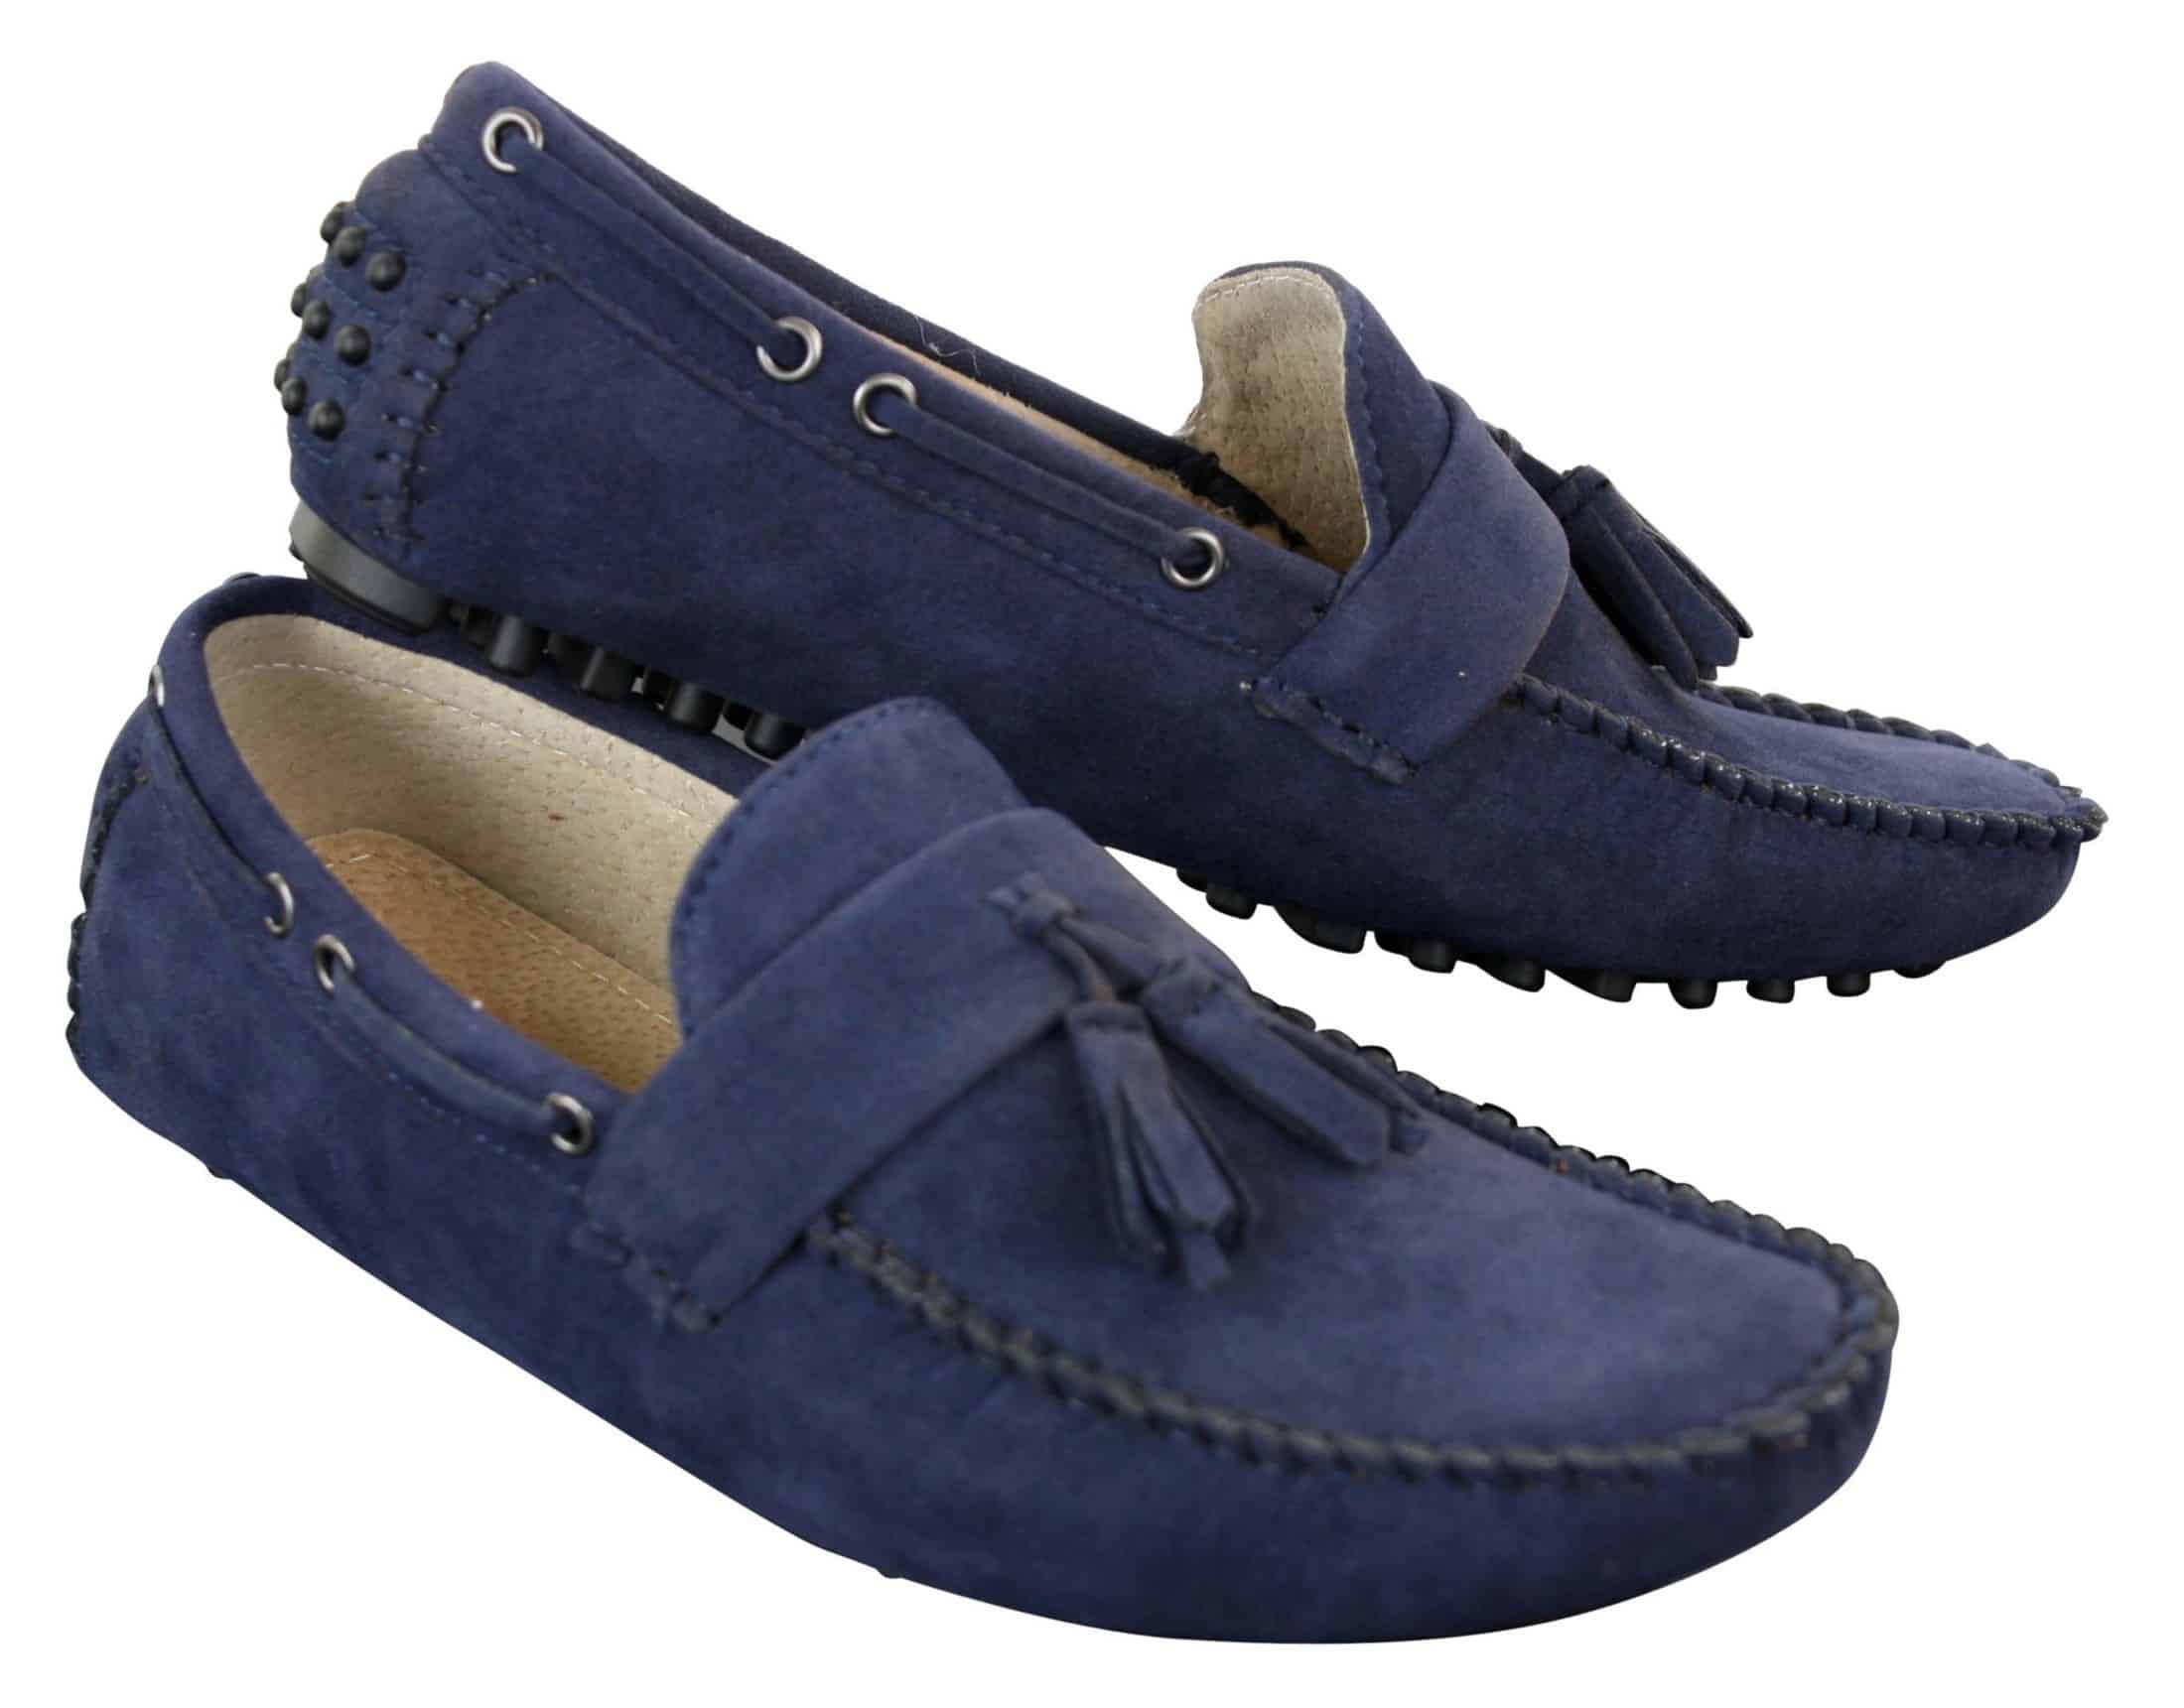 Mens Suede Brown Navy Tassle Loafers Driving Shoes Moccasins Slip On ...